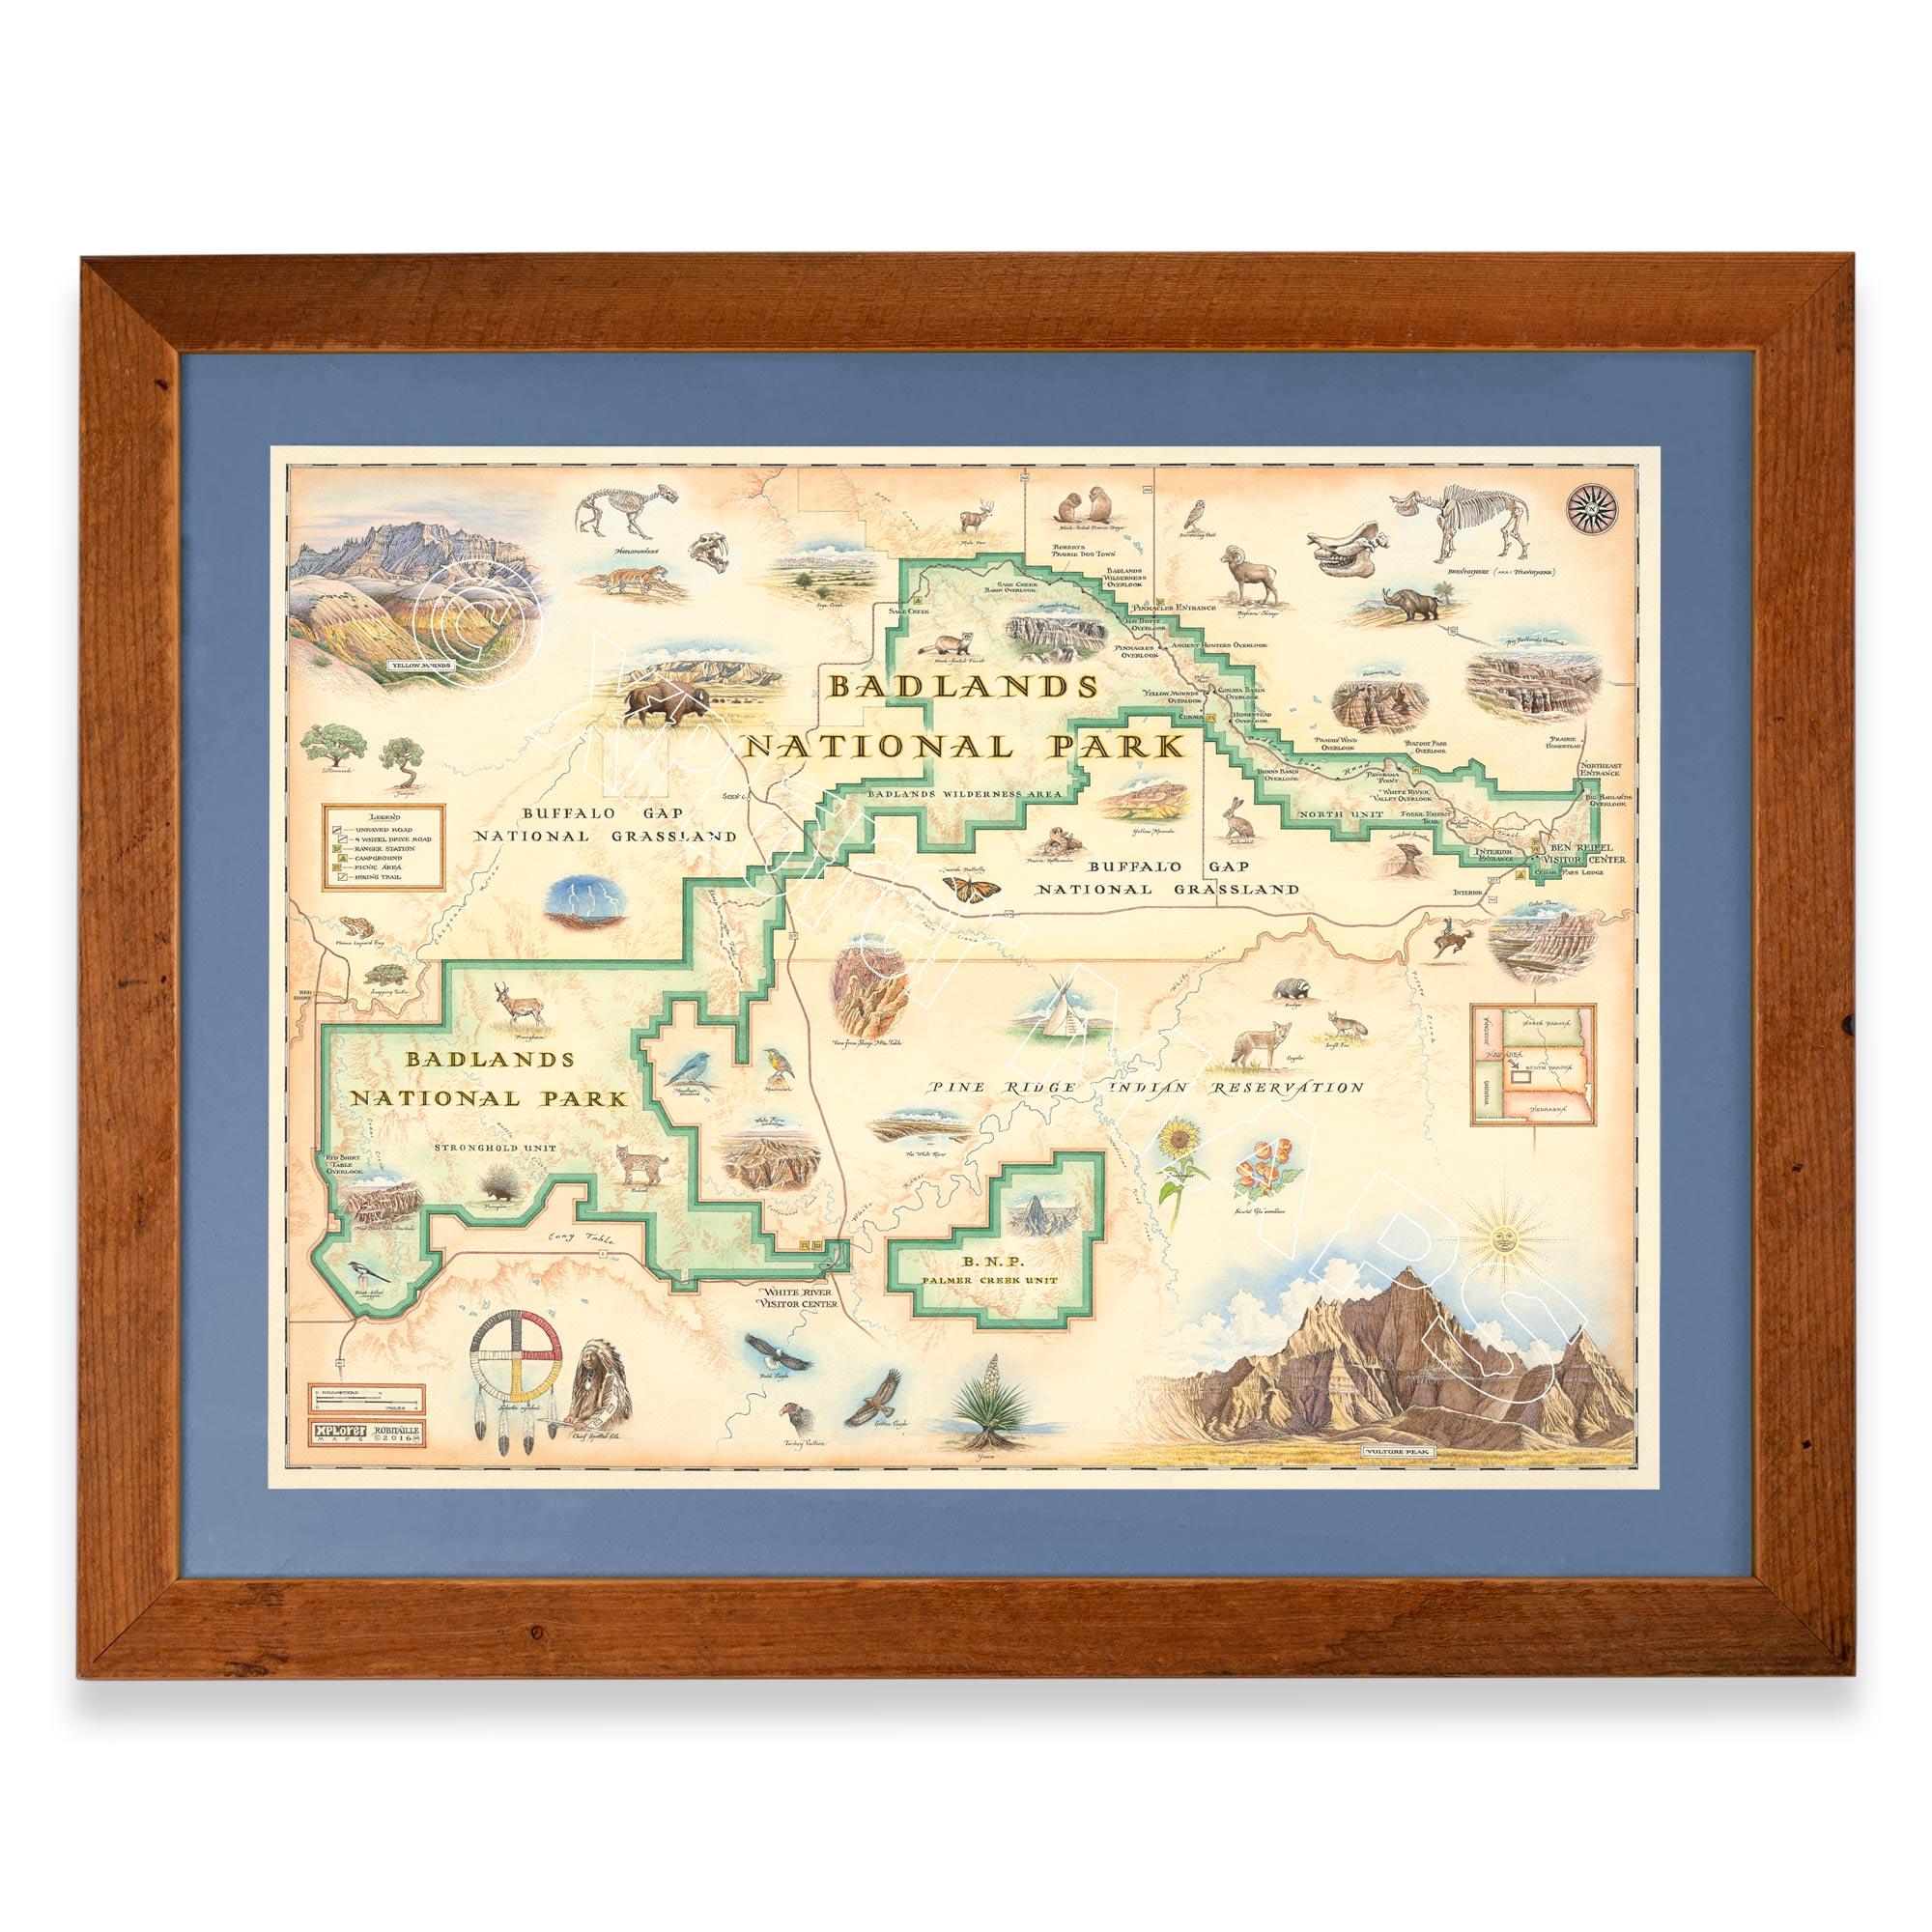 Badlands National Park hand-drawn map in a Montana Flathead Lake reclaimed larch wood frame and blue mat. 